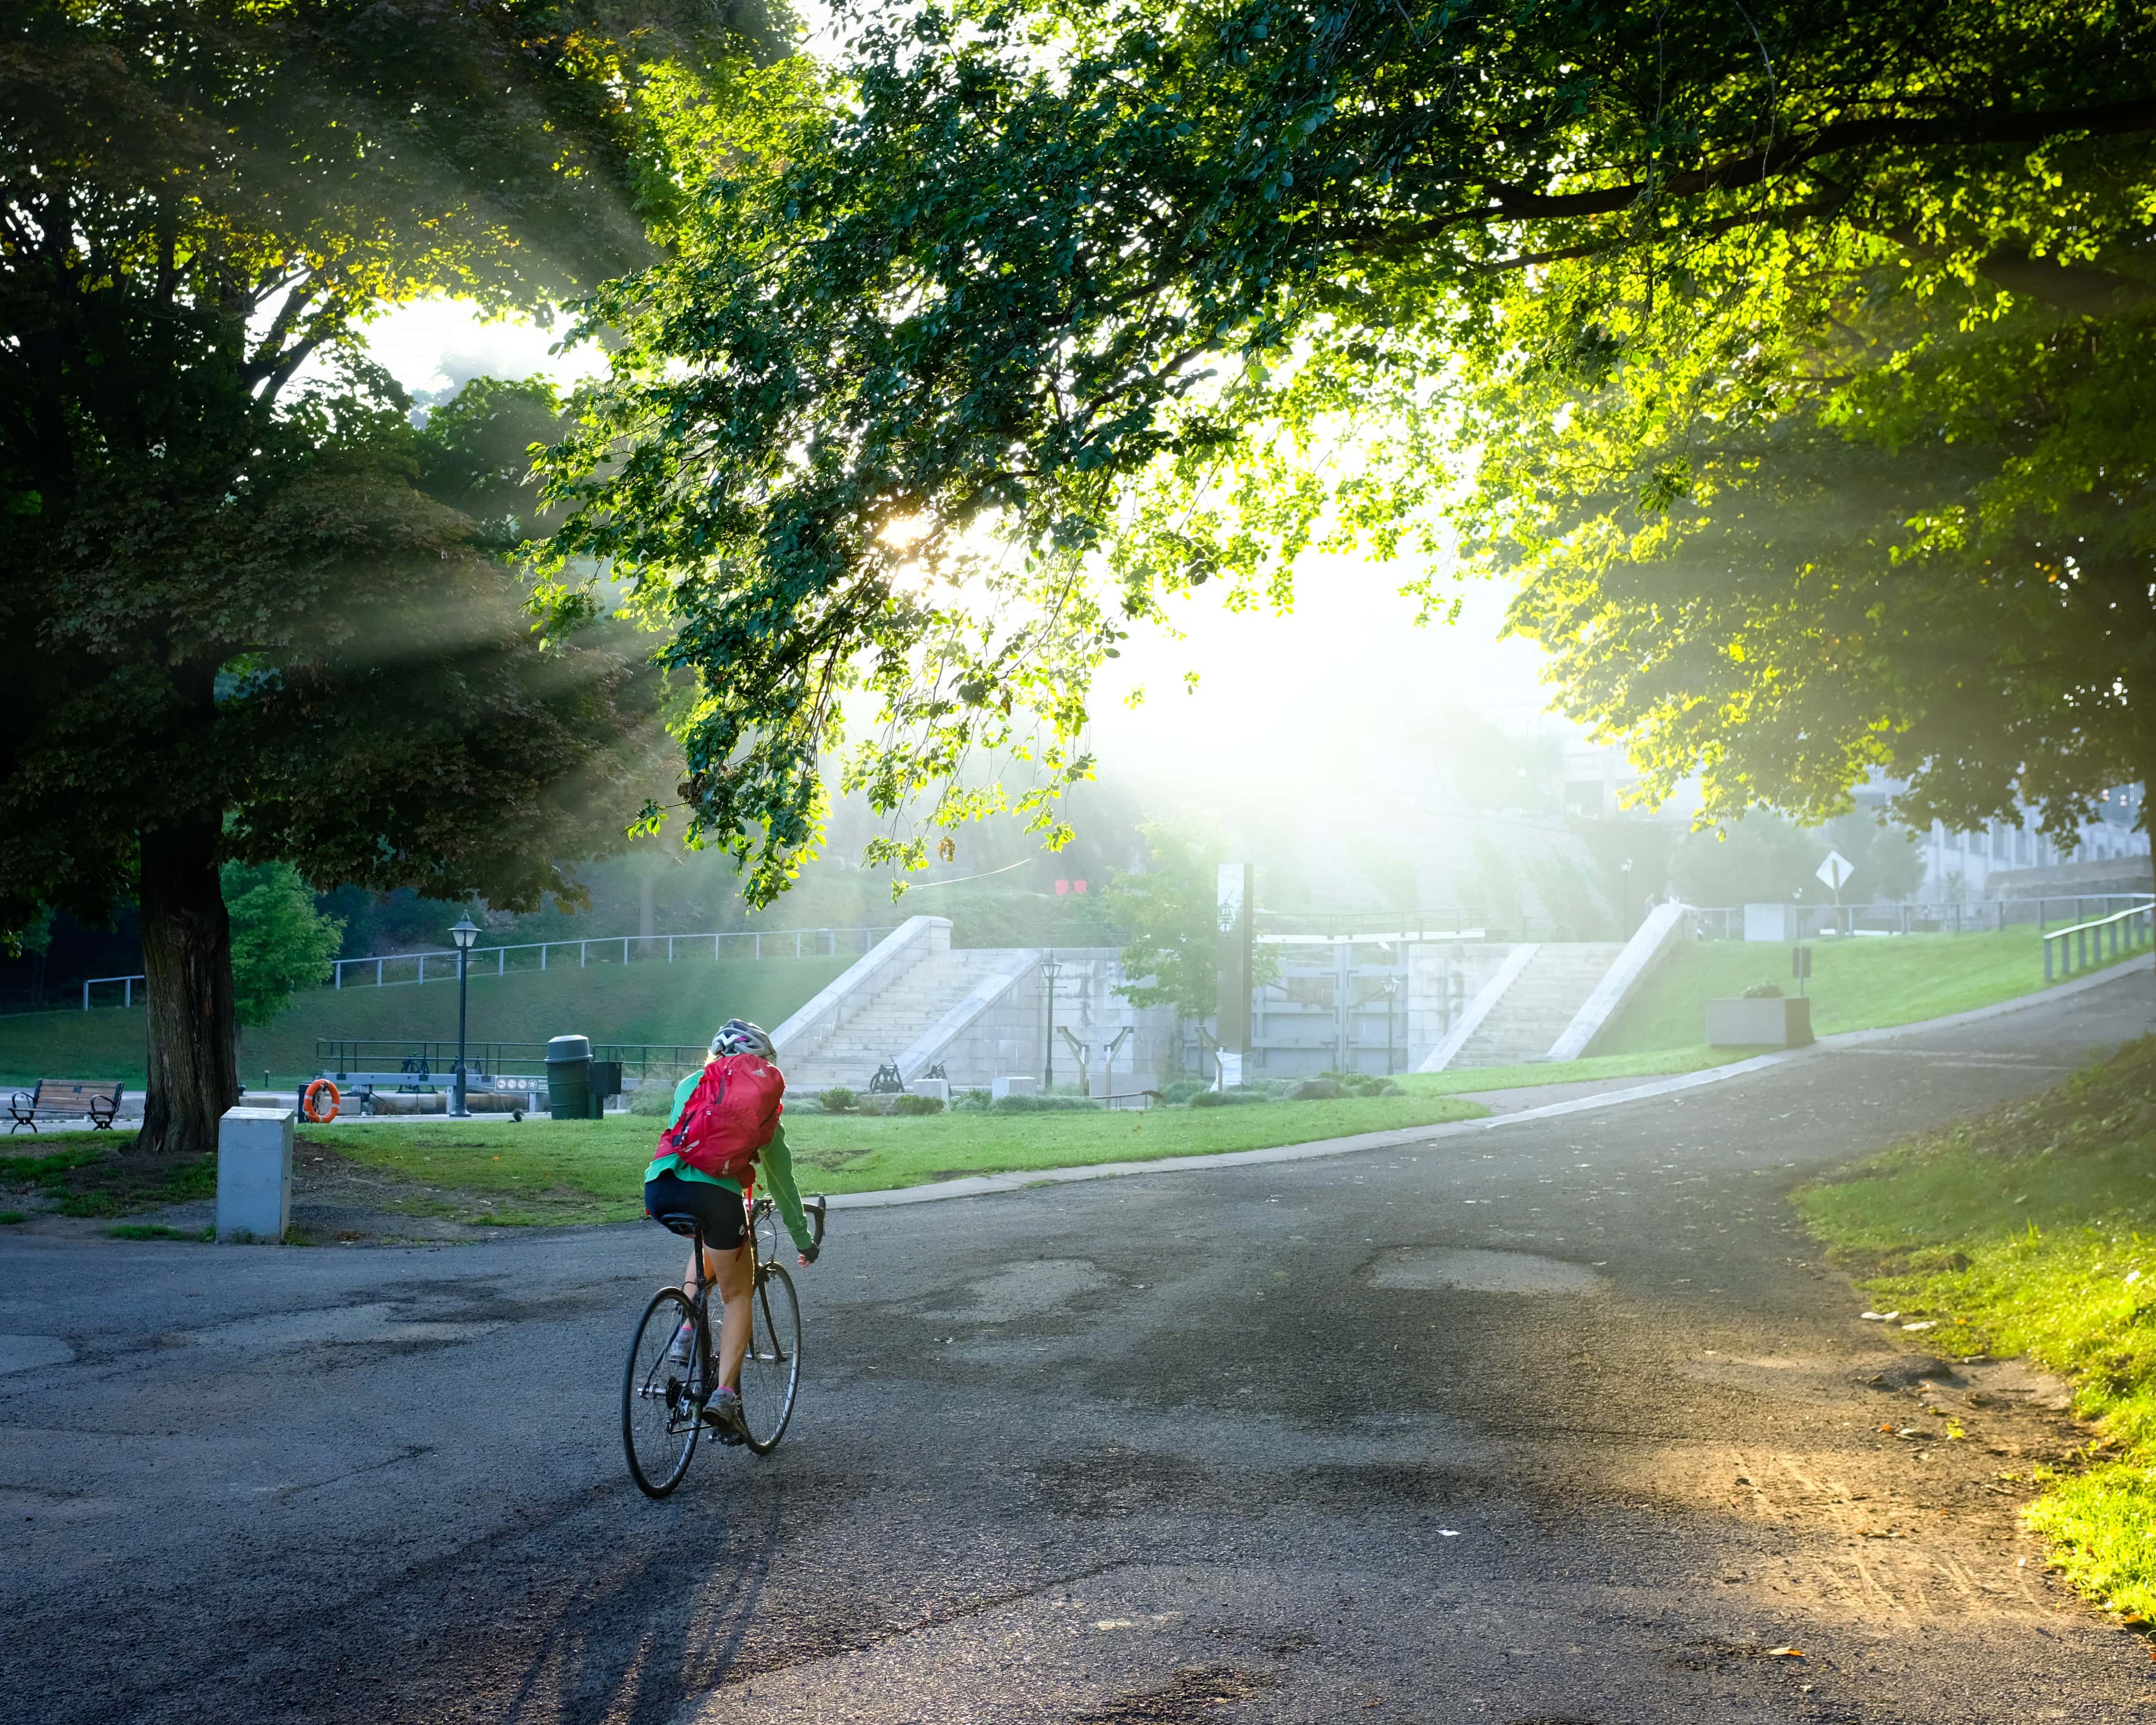 Light shining through leaves as woman cycles through the park